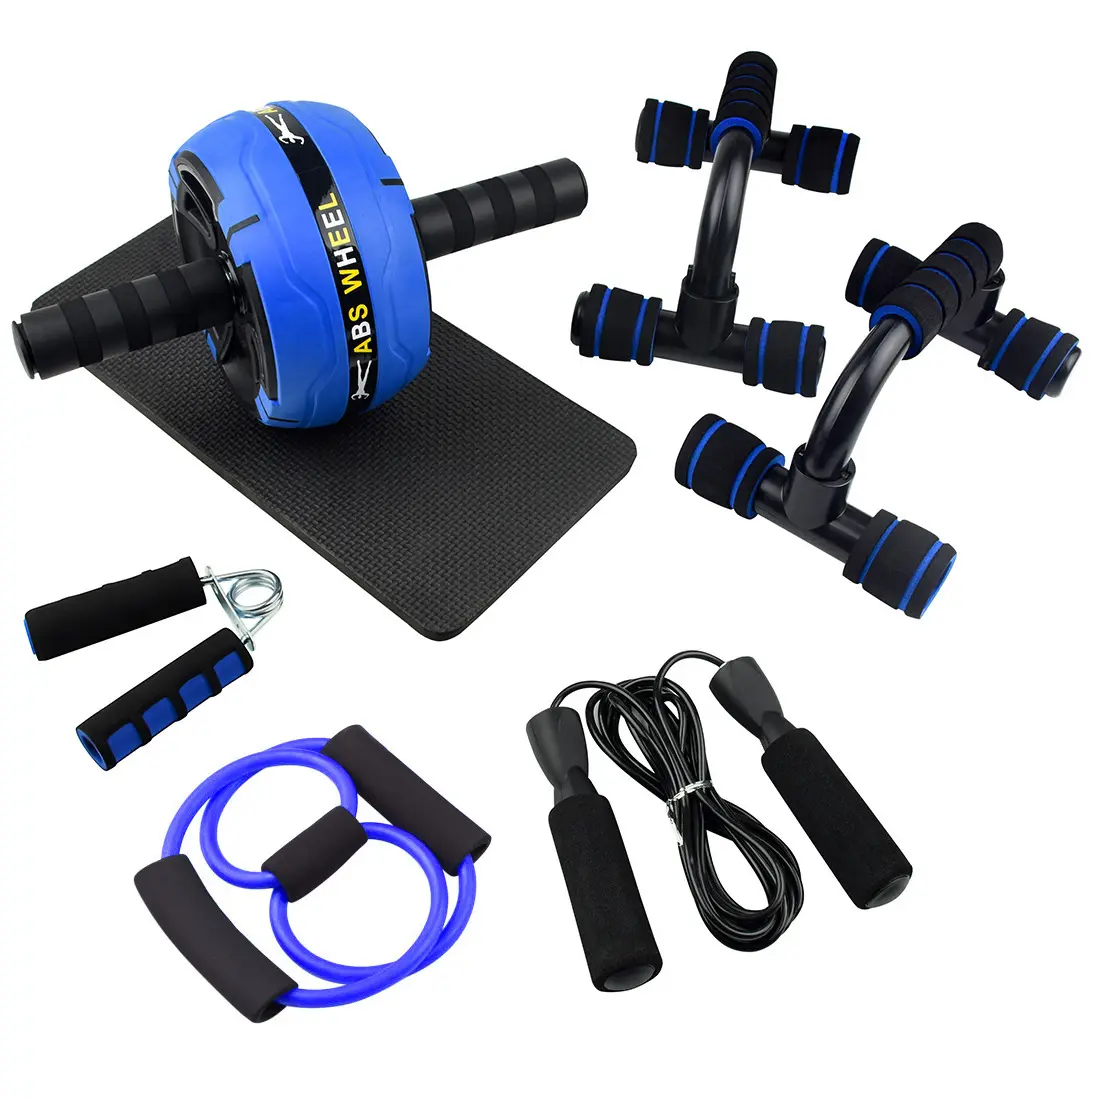 Home Exercise Machine Abdominal Wheel Resistance Tube Jump Rope Hand Grip Home Workout 6 In 1 Ab Wheel Roller Kit With Knee Pad